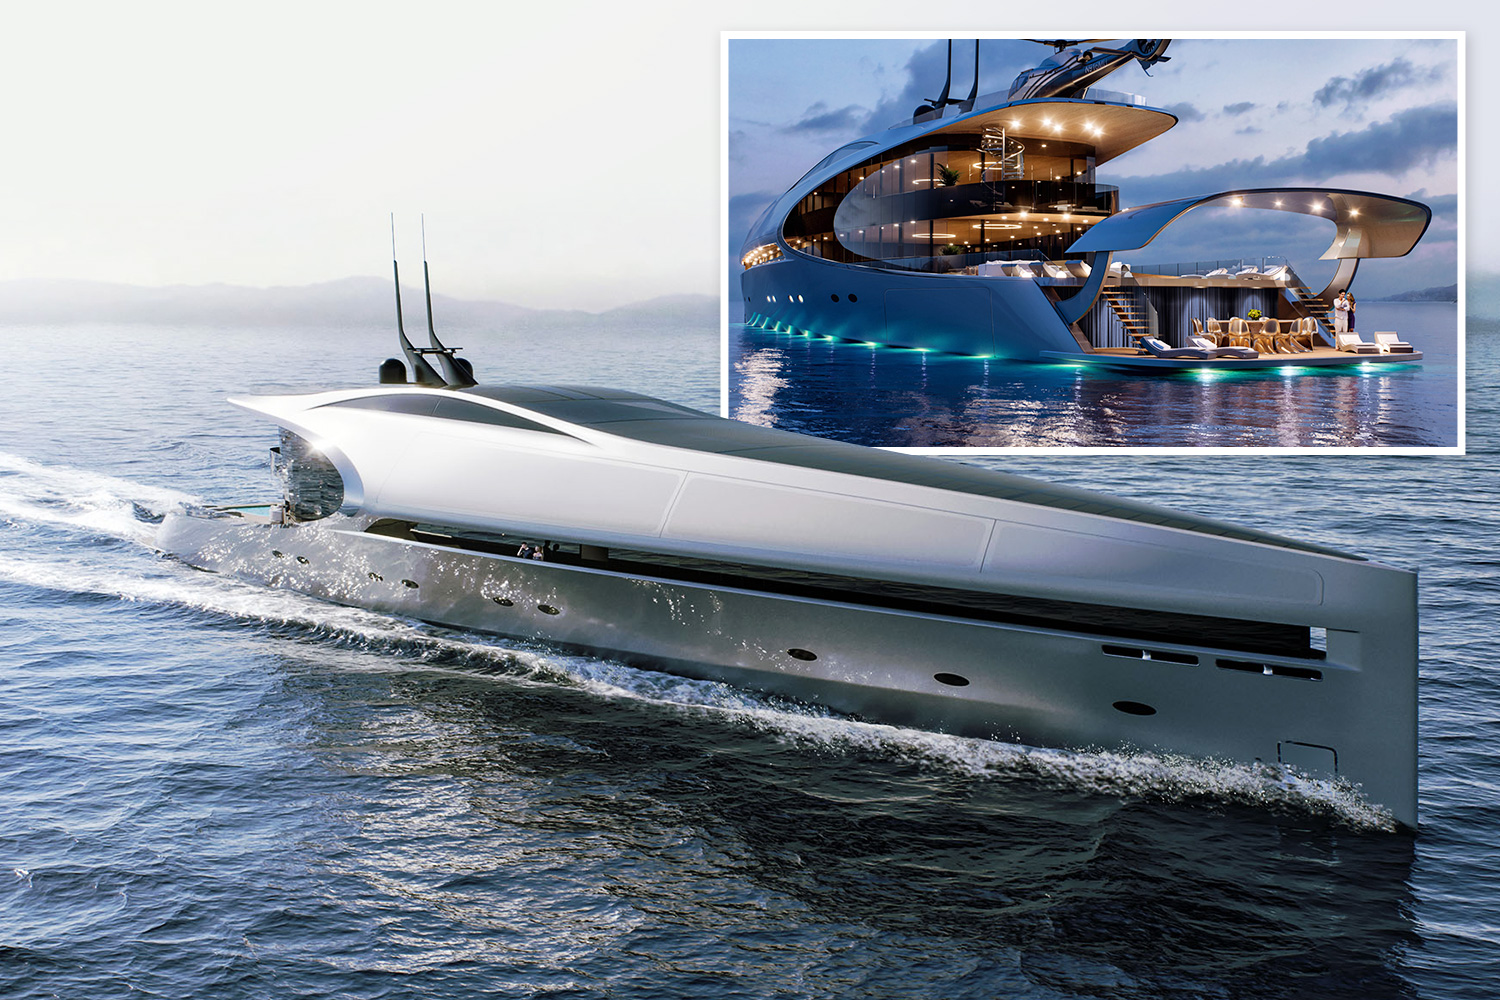 Stunning £70m superyacht that's shaped like knife has four decks, helicopter pad and a swimming pool